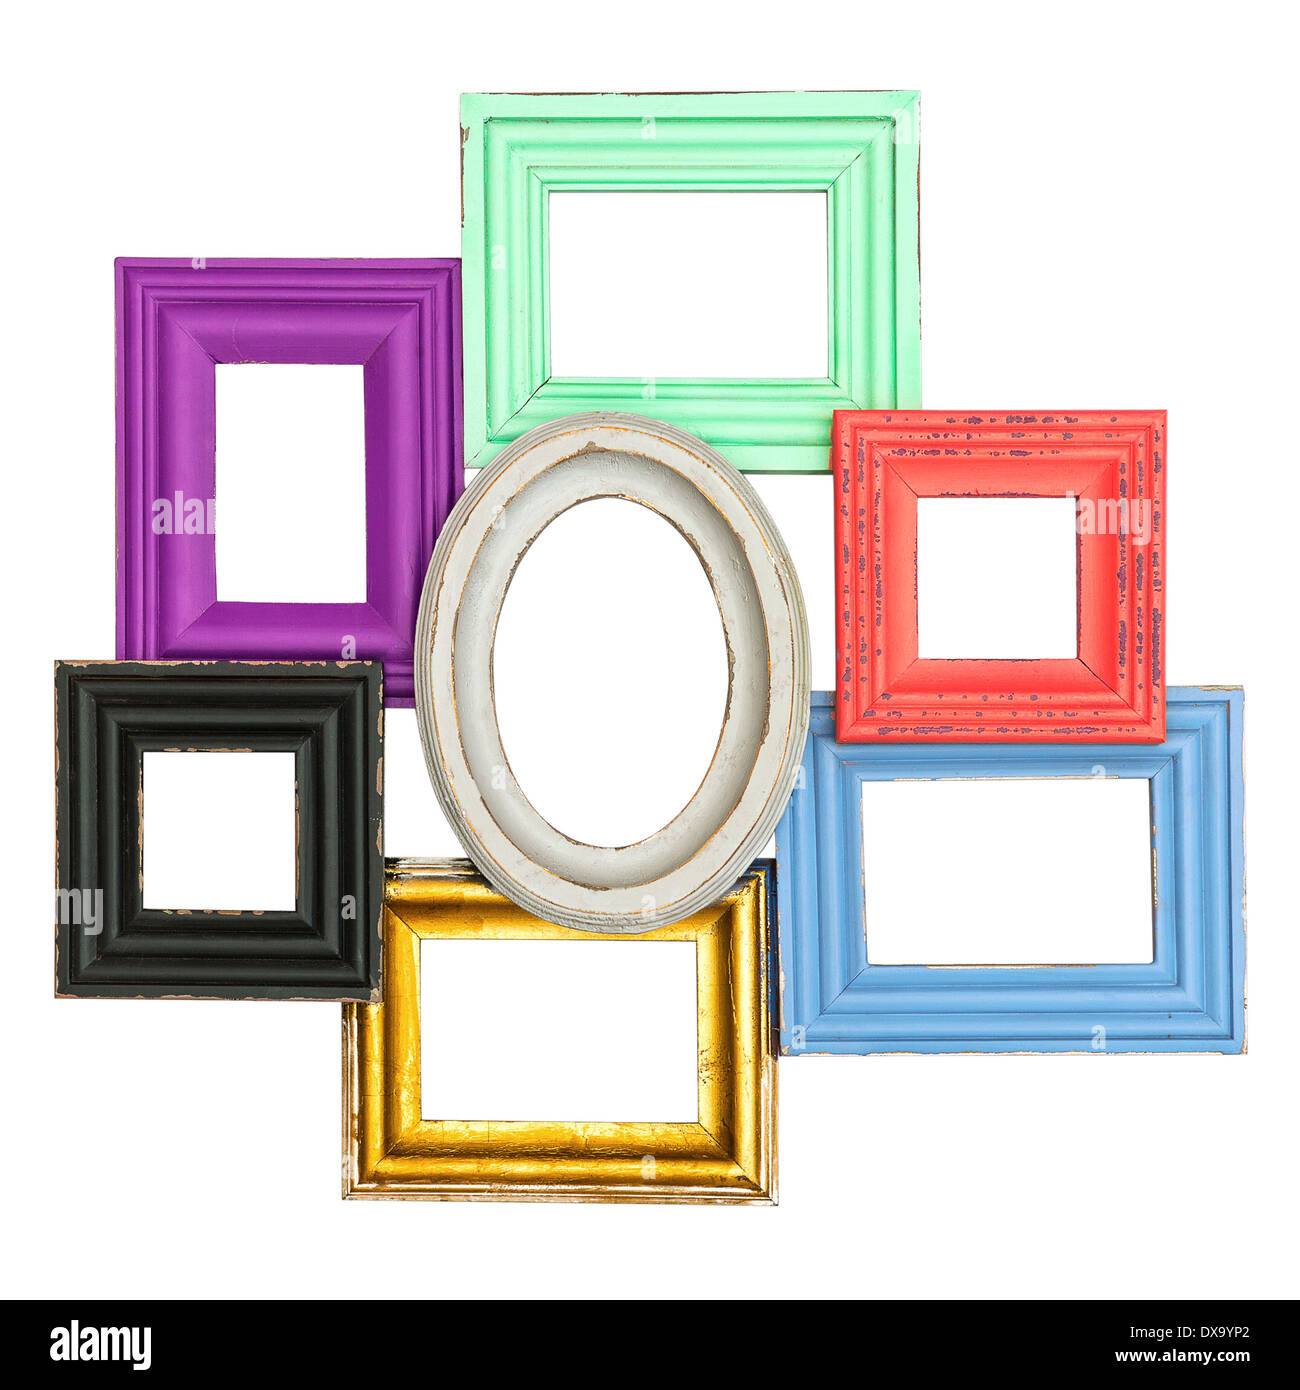 frames for photo and picture. vintage style framework isolated Stock Photo